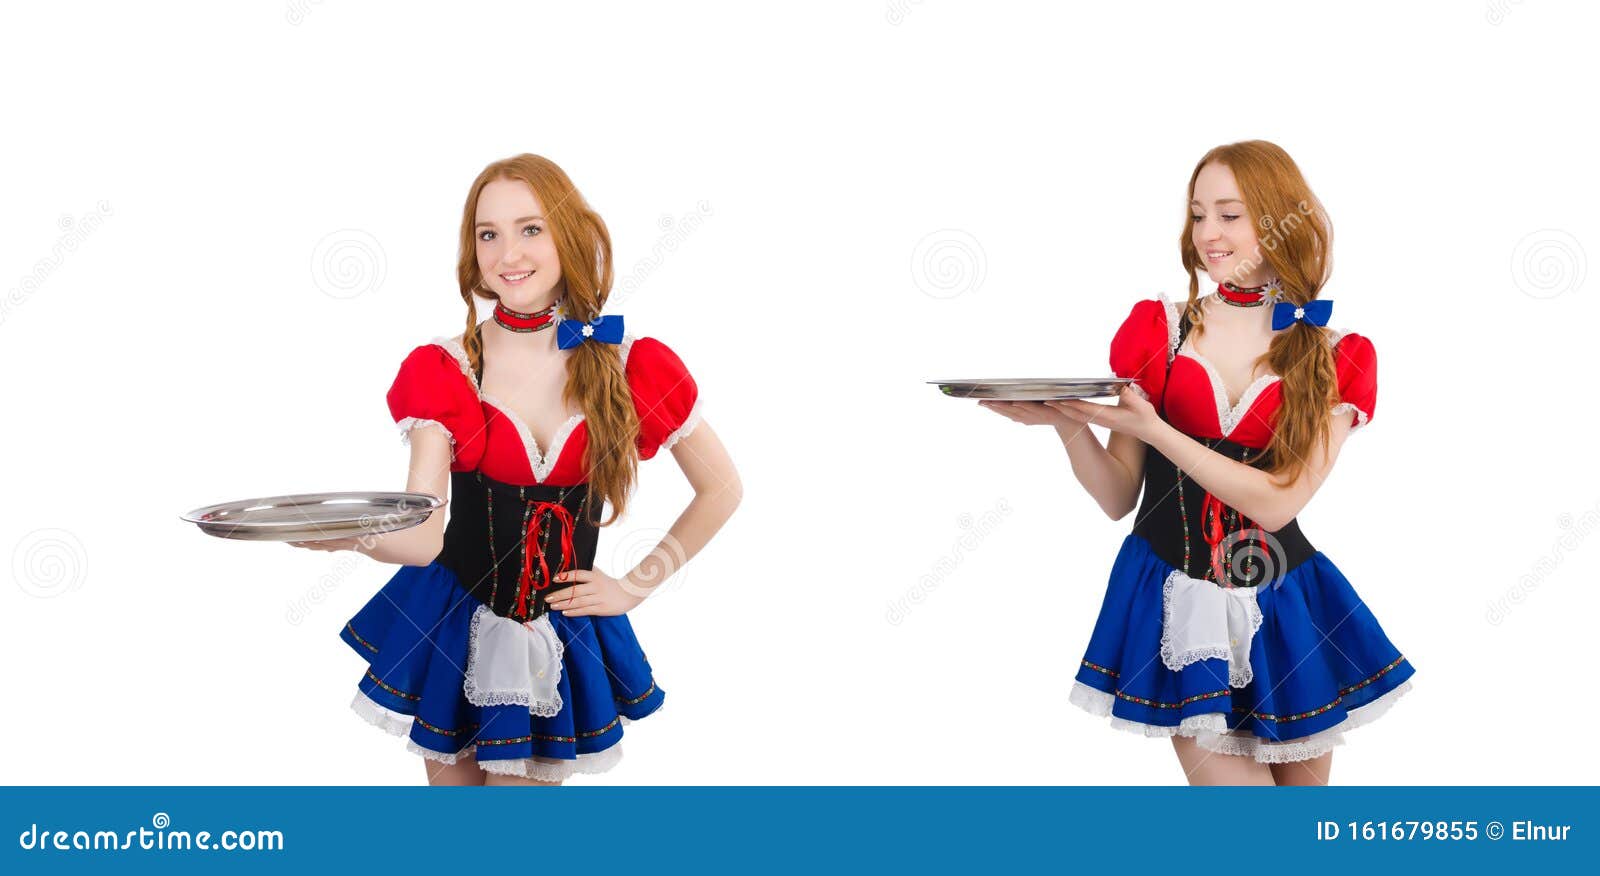 German Girl in Traditional Festival Clothing Stock Image - Image of ...